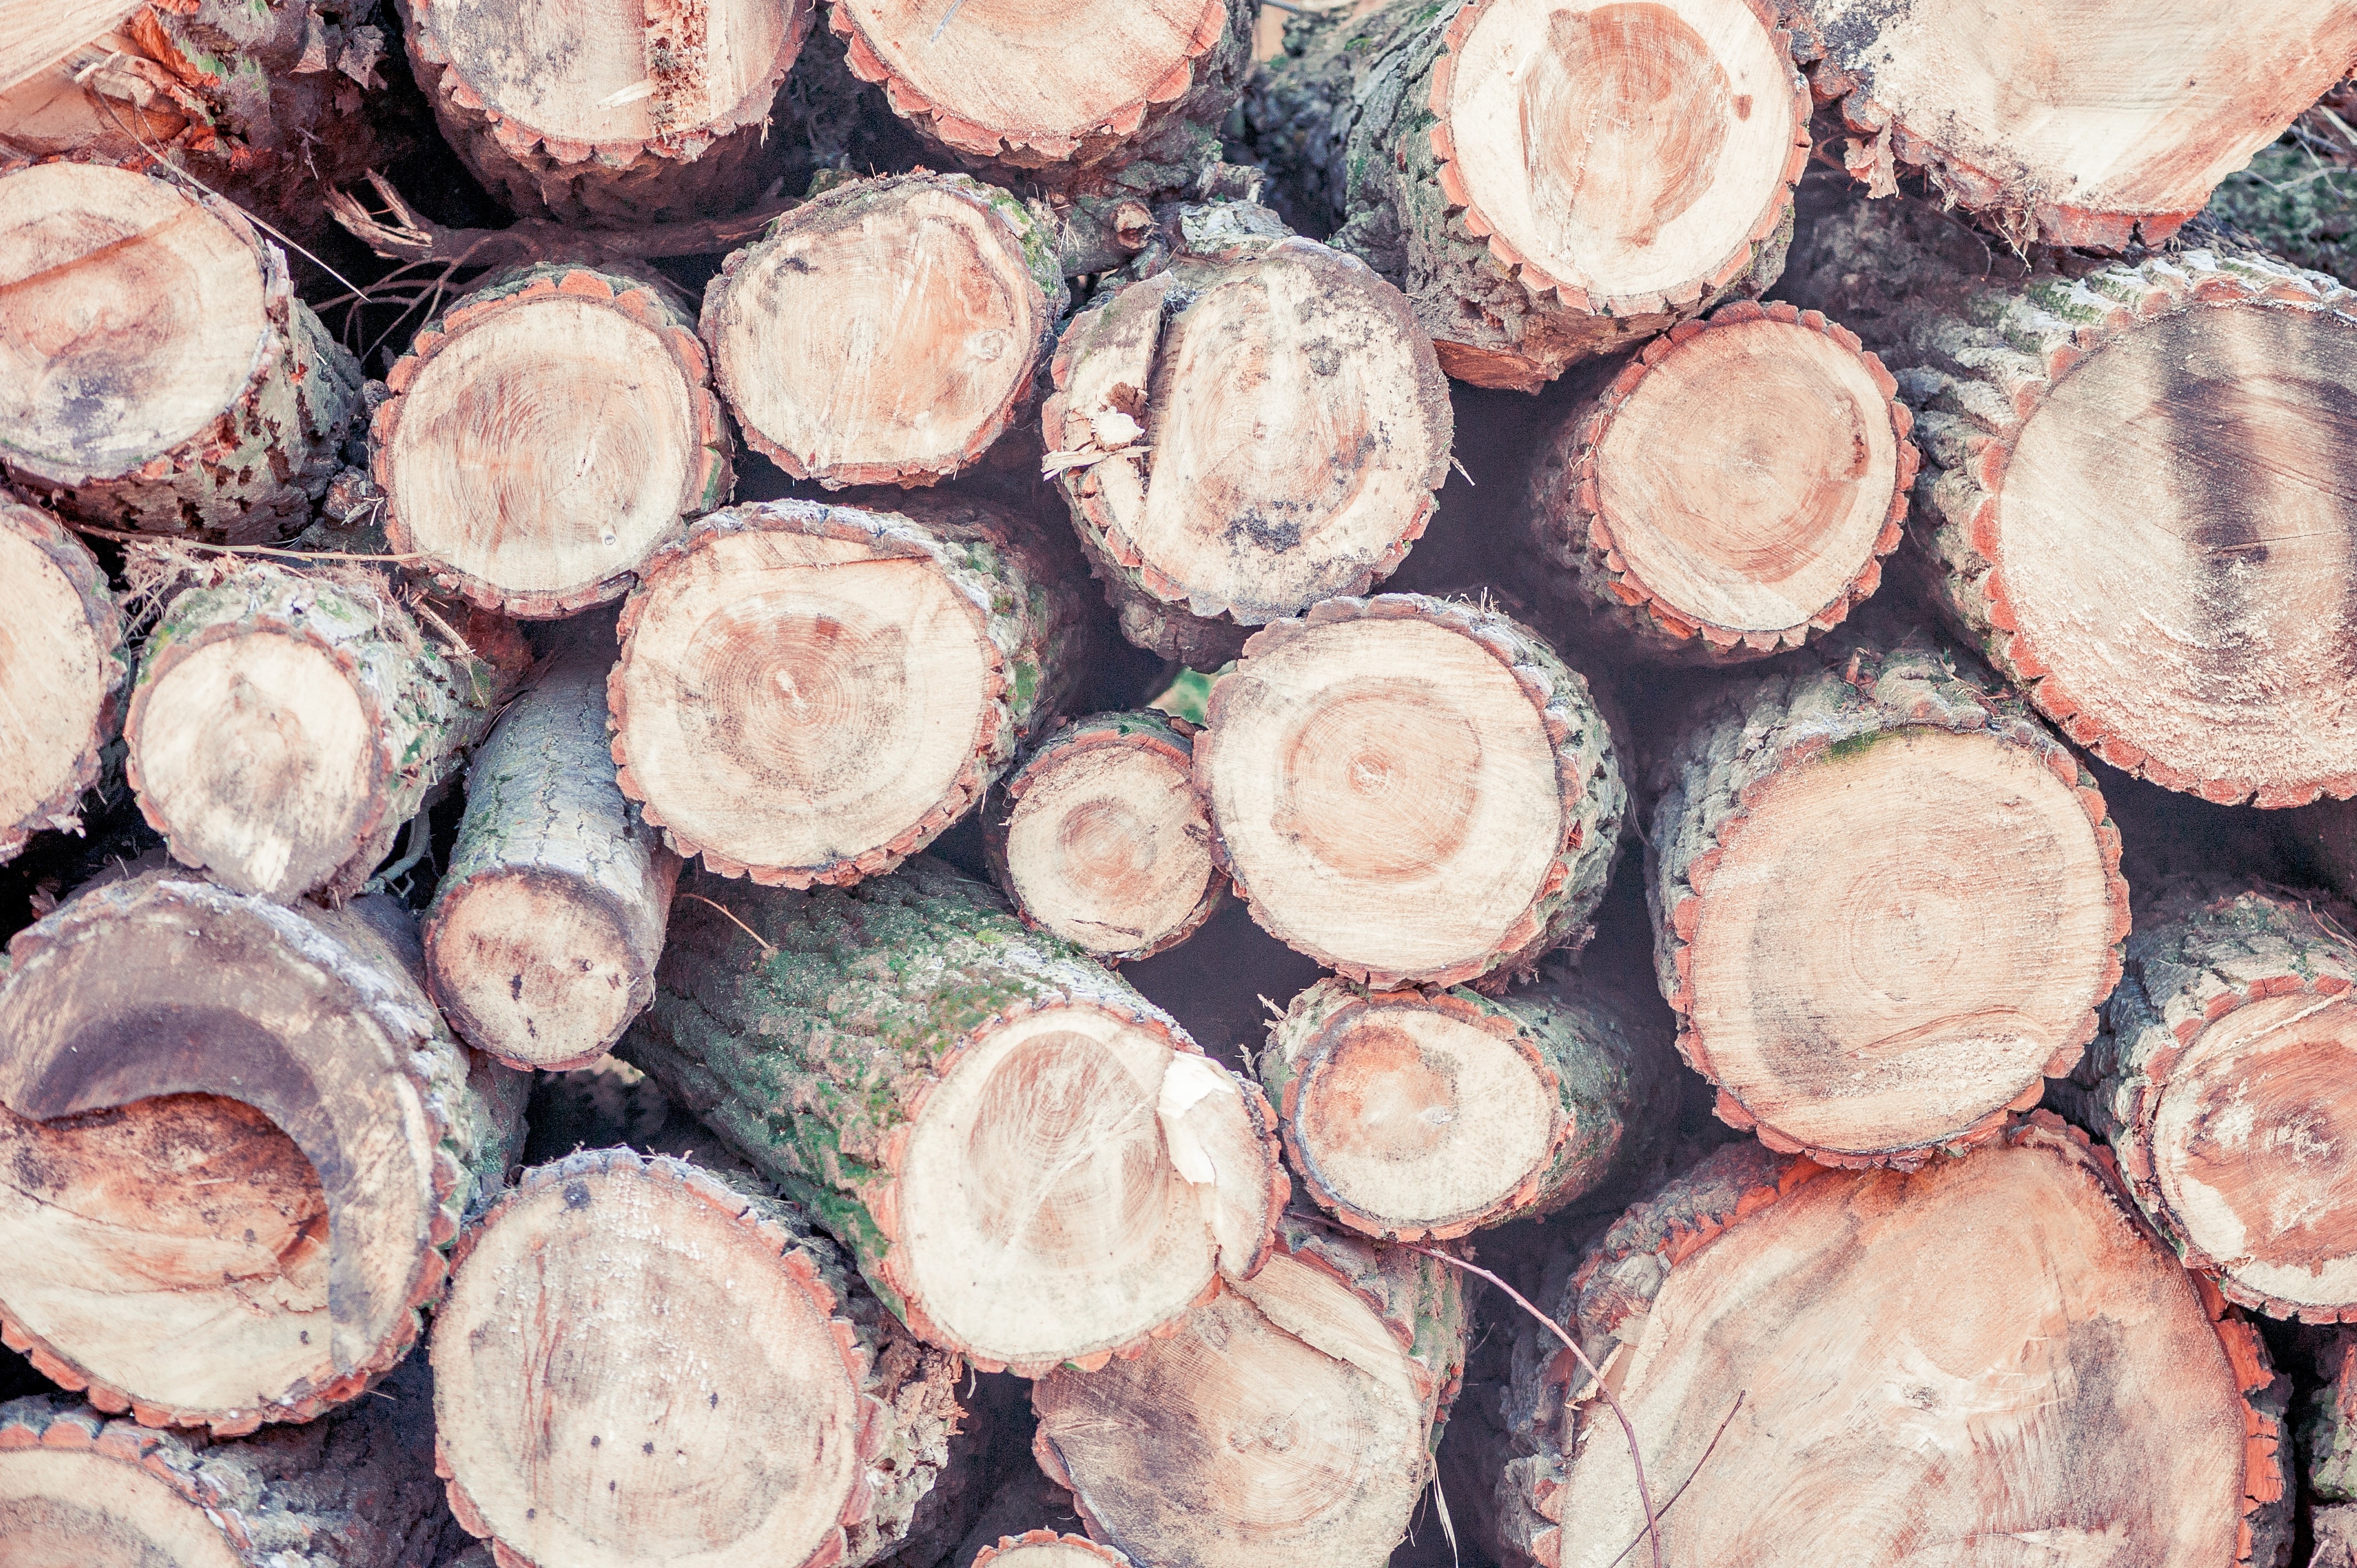 Tree Trunks, Wood, Strains, Nature, large group of objects, backgrounds